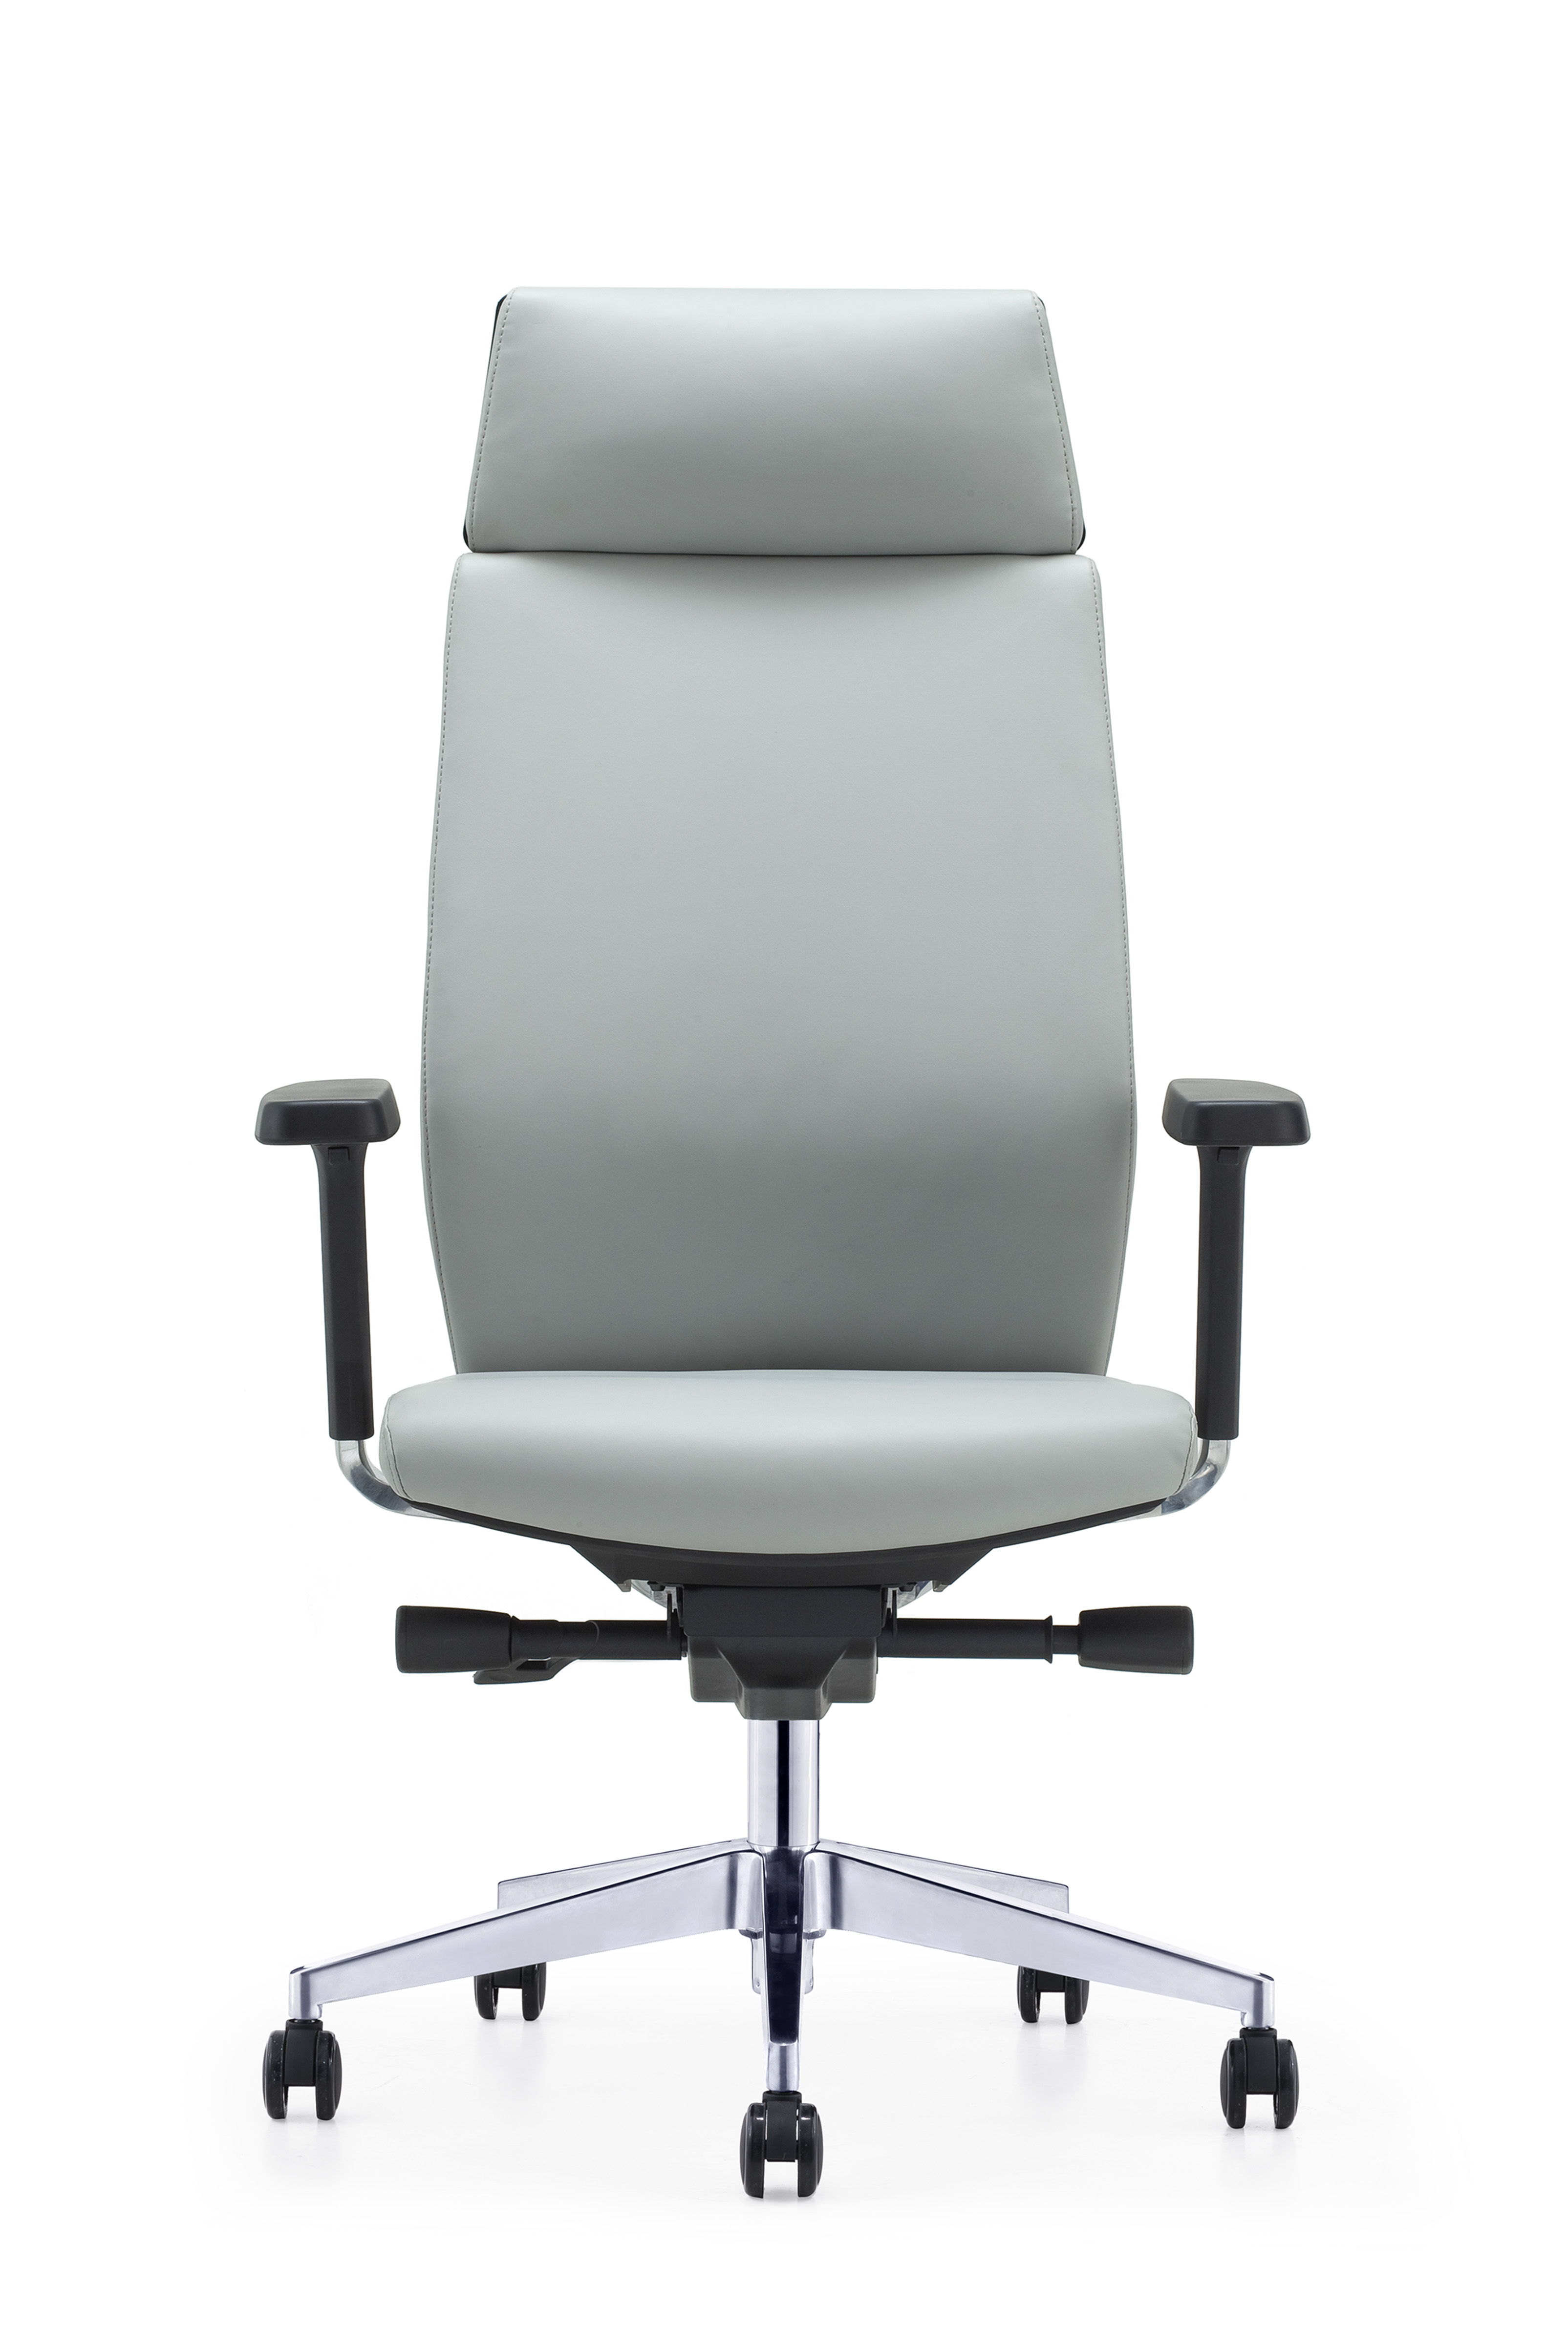 China Wholesale Leather Zero Gravity Chair Manufacturers –  CH-240A – SitZone